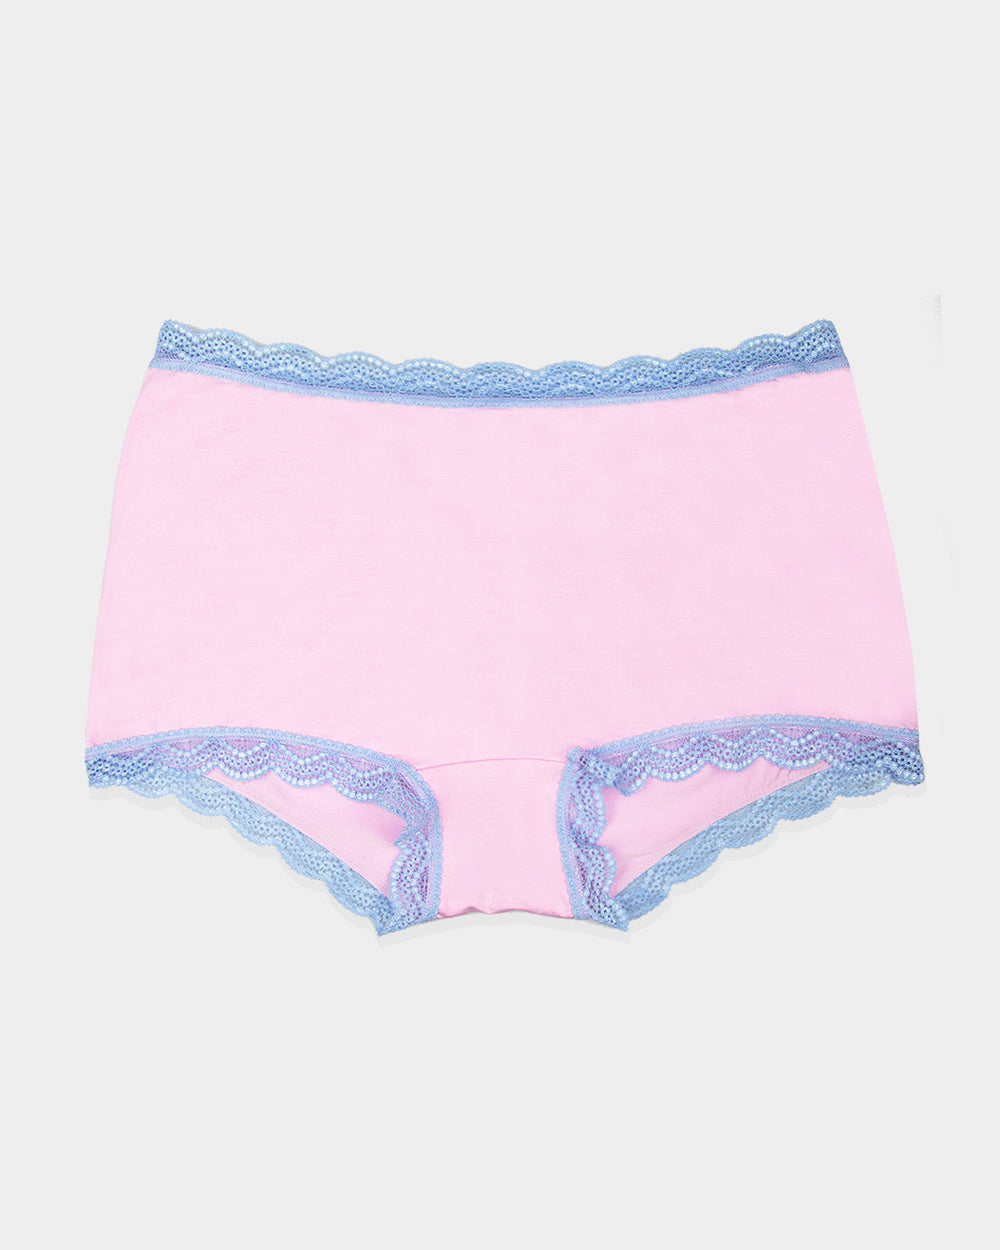 Hipster Brief  - Pirouette and Air Stripe & Stare